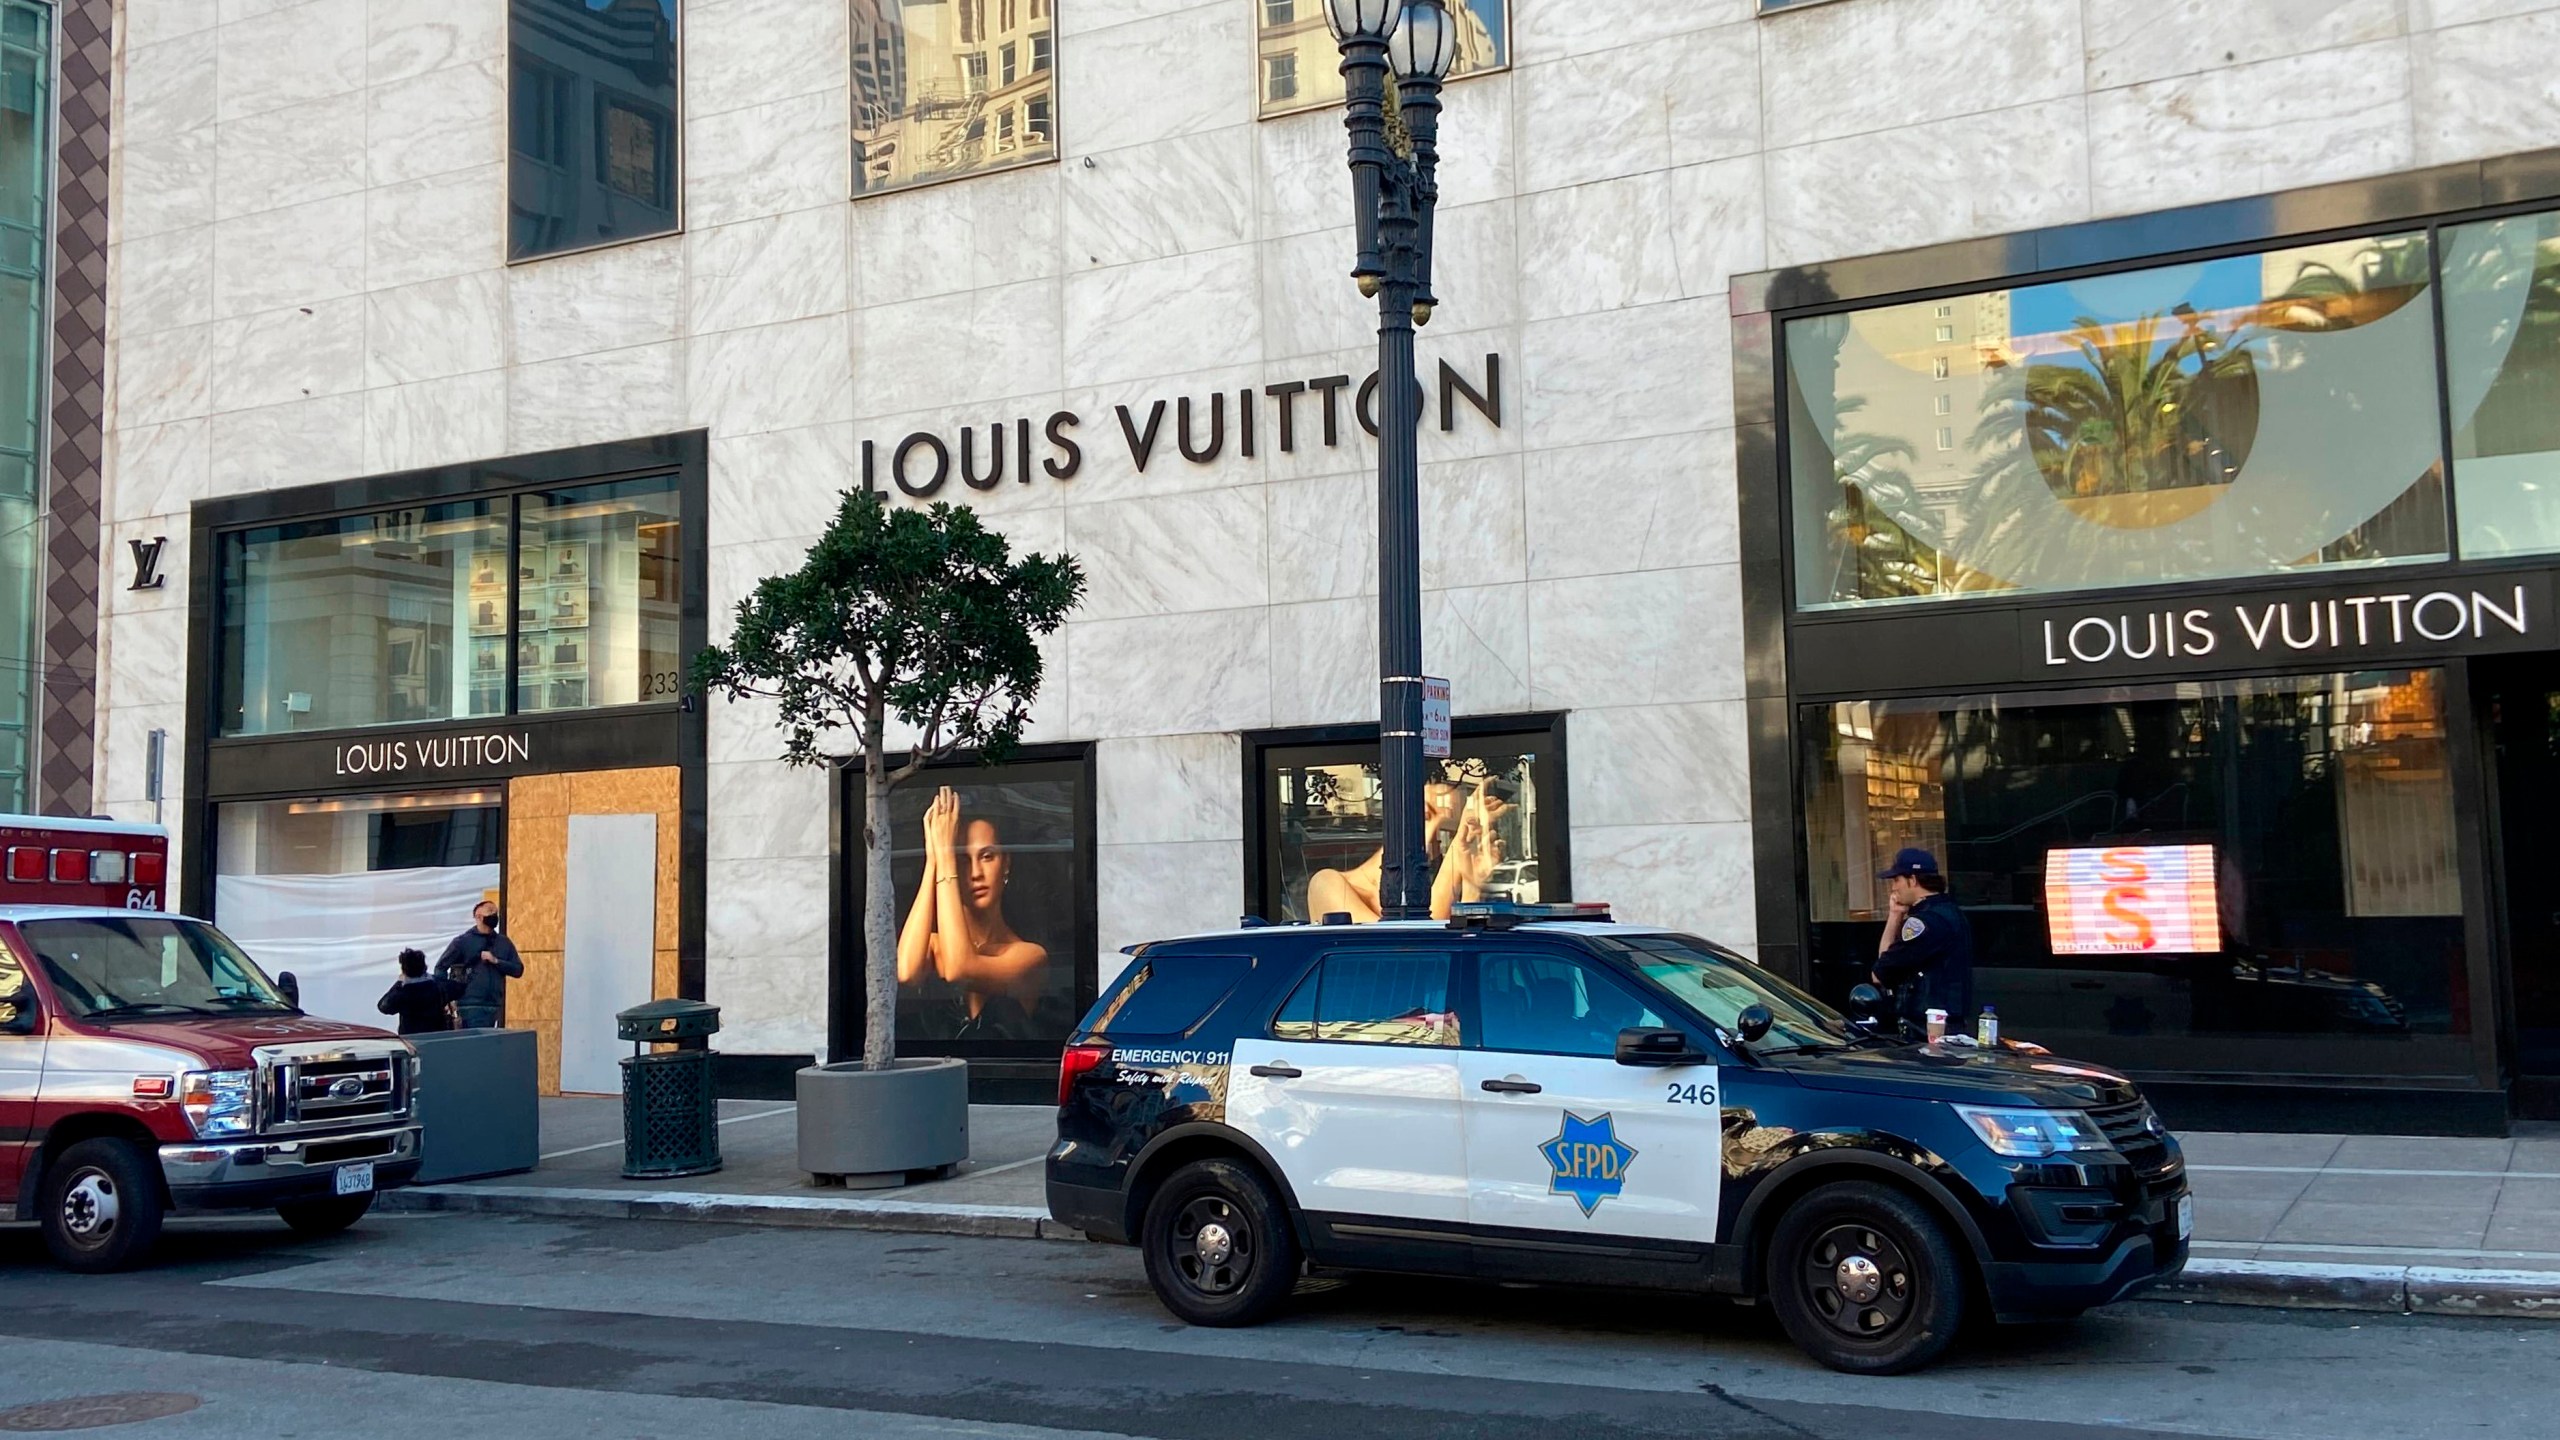 FILE - Police officers and emergency crews park outside the Louis Vuitton store in San Francisco's Union Square on Nov. 21, 2021, after looters ransacked businesses. Facing mounting pressure to crack down on a retail theft crisis, California lawmakers are split on how best to tackle the problem that some say had caused major store closures and products like deodorants to be locked behind plexiglass. (Danielle Echeverria/San Francisco Chronicle via AP, File)